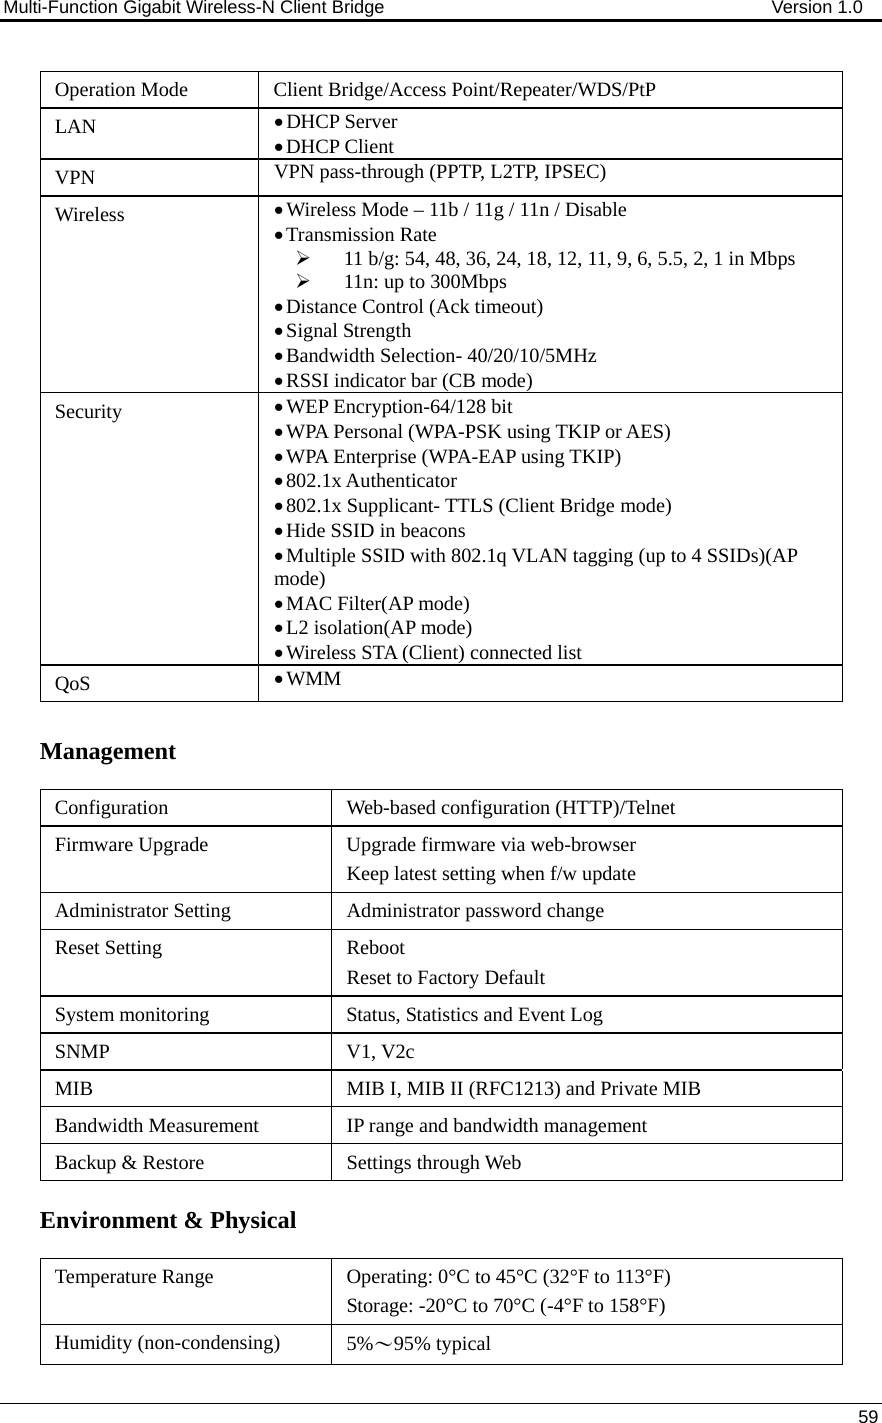 Multi-Function Gigabit Wireless-N Client Bridge                                        Version 1.0    59  Operation Mode  Client Bridge/Access Point/Repeater/WDS/PtP LAN  • DHCP Server • DHCP Client VPN  VPN pass-through (PPTP, L2TP, IPSEC) Wireless  • Wireless Mode – 11b / 11g / 11n / Disable • Transmission Rate ¾ 11 b/g: 54, 48, 36, 24, 18, 12, 11, 9, 6, 5.5, 2, 1 in Mbps ¾ 11n: up to 300Mbps • Distance Control (Ack timeout) • Signal Strength • Bandwidth Selection- 40/20/10/5MHz • RSSI indicator bar (CB mode) Security  • WEP Encryption-64/128 bit • WPA Personal (WPA-PSK using TKIP or AES) • WPA Enterprise (WPA-EAP using TKIP) • 802.1x Authenticator • 802.1x Supplicant- TTLS (Client Bridge mode) • Hide SSID in beacons • Multiple SSID with 802.1q VLAN tagging (up to 4 SSIDs)(AP mode) • MAC Filter(AP mode) • L2 isolation(AP mode) • Wireless STA (Client) connected list QoS  • WMM  Management Configuration  Web-based configuration (HTTP)/Telnet Firmware Upgrade  Upgrade firmware via web-browser Keep latest setting when f/w update Administrator Setting  Administrator password change Reset Setting  Reboot Reset to Factory Default System monitoring  Status, Statistics and Event Log SNMP V1, V2c MIB  MIB I, MIB II (RFC1213) and Private MIB Bandwidth Measurement  IP range and bandwidth management Backup &amp; Restore  Settings through Web  Environment &amp; Physical Temperature Range  Operating: 0°C to 45°C (32°F to 113°F)  Storage: -20°C to 70°C (-4°F to 158°F) Humidity (non-condensing)  5%～95% typical 